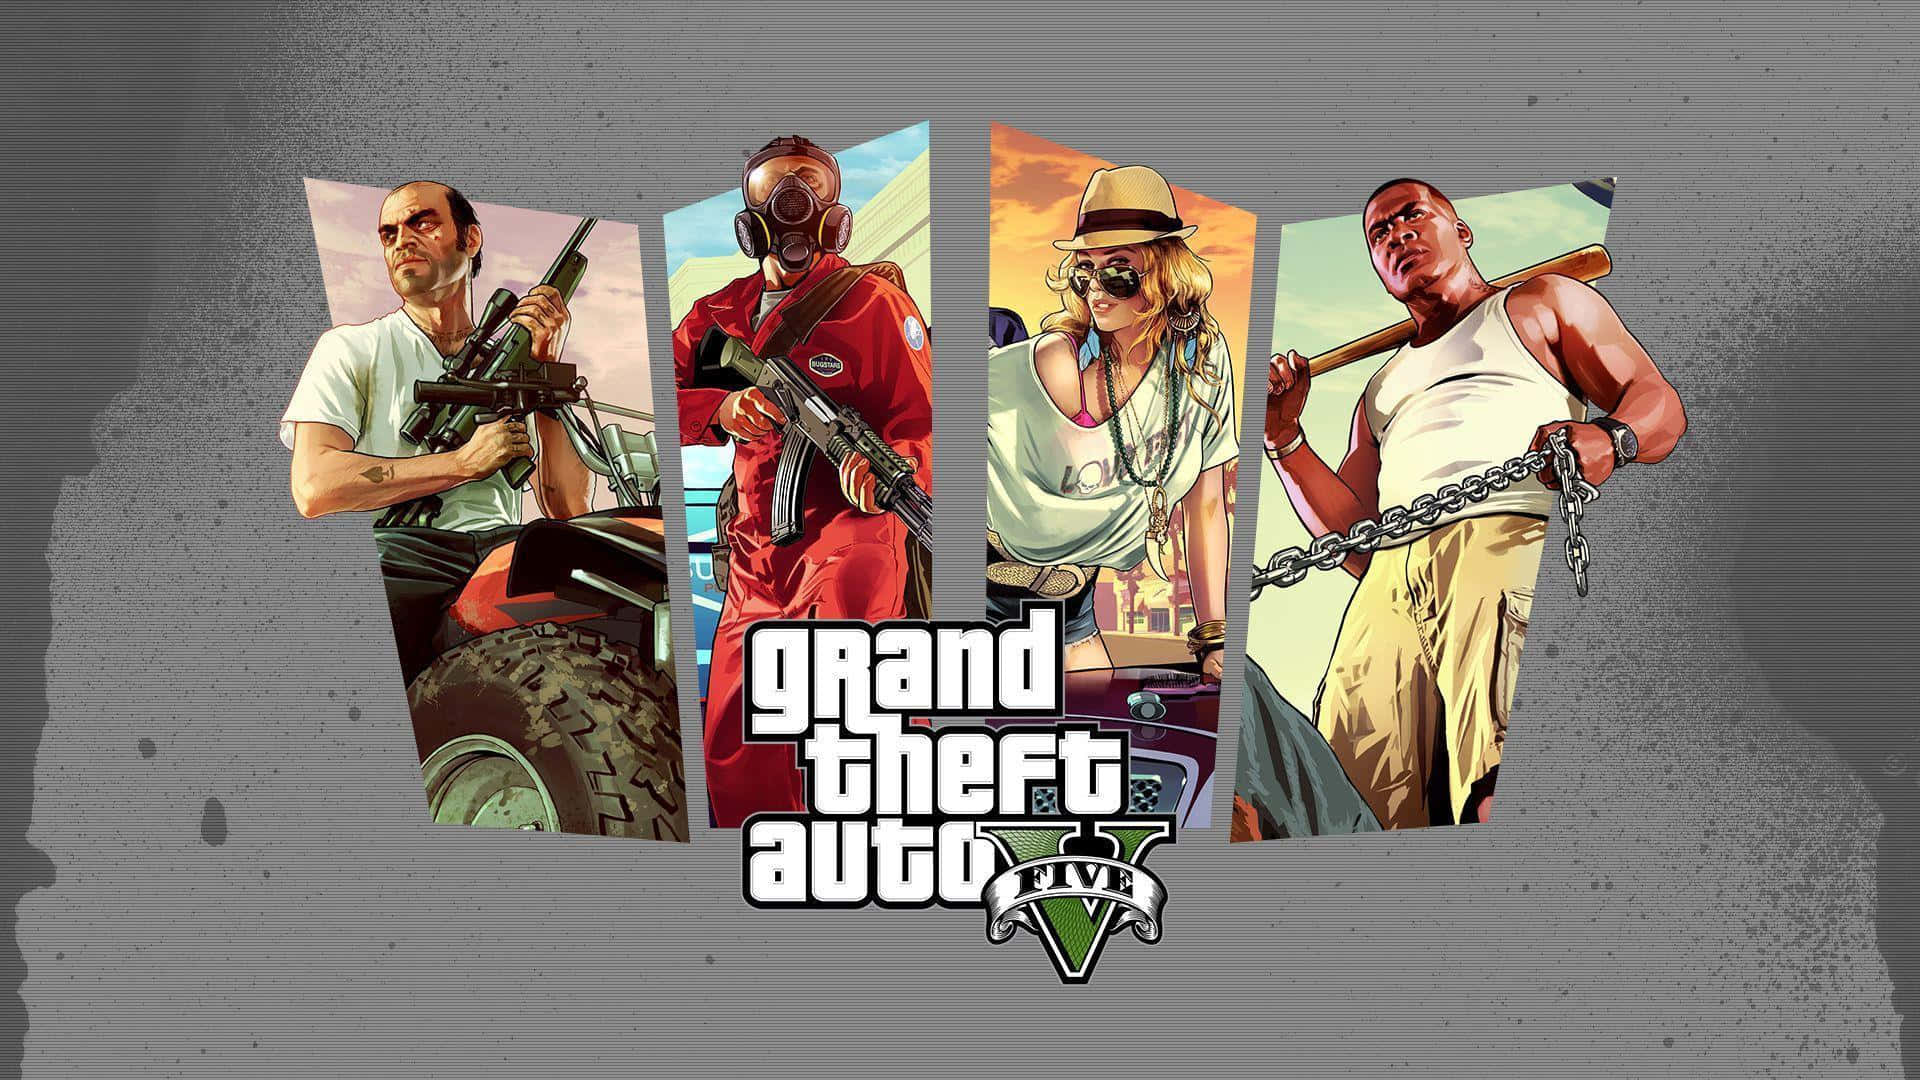 Action Packed Adventure in Grand Theft Auto V